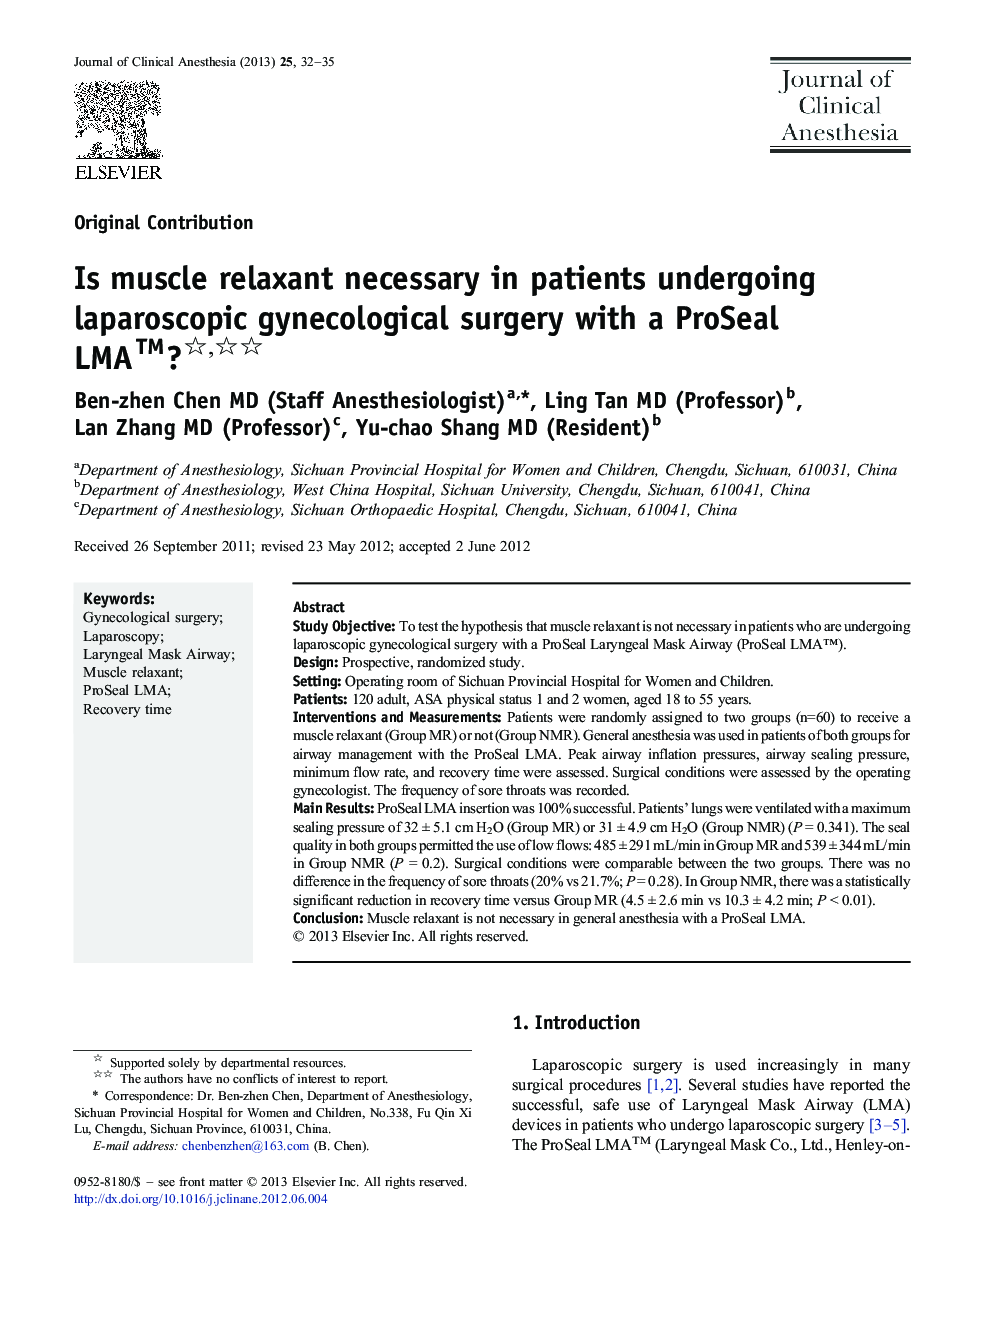 Is muscle relaxant necessary in patients undergoing laparoscopic gynecological surgery with a ProSeal LMATM? 